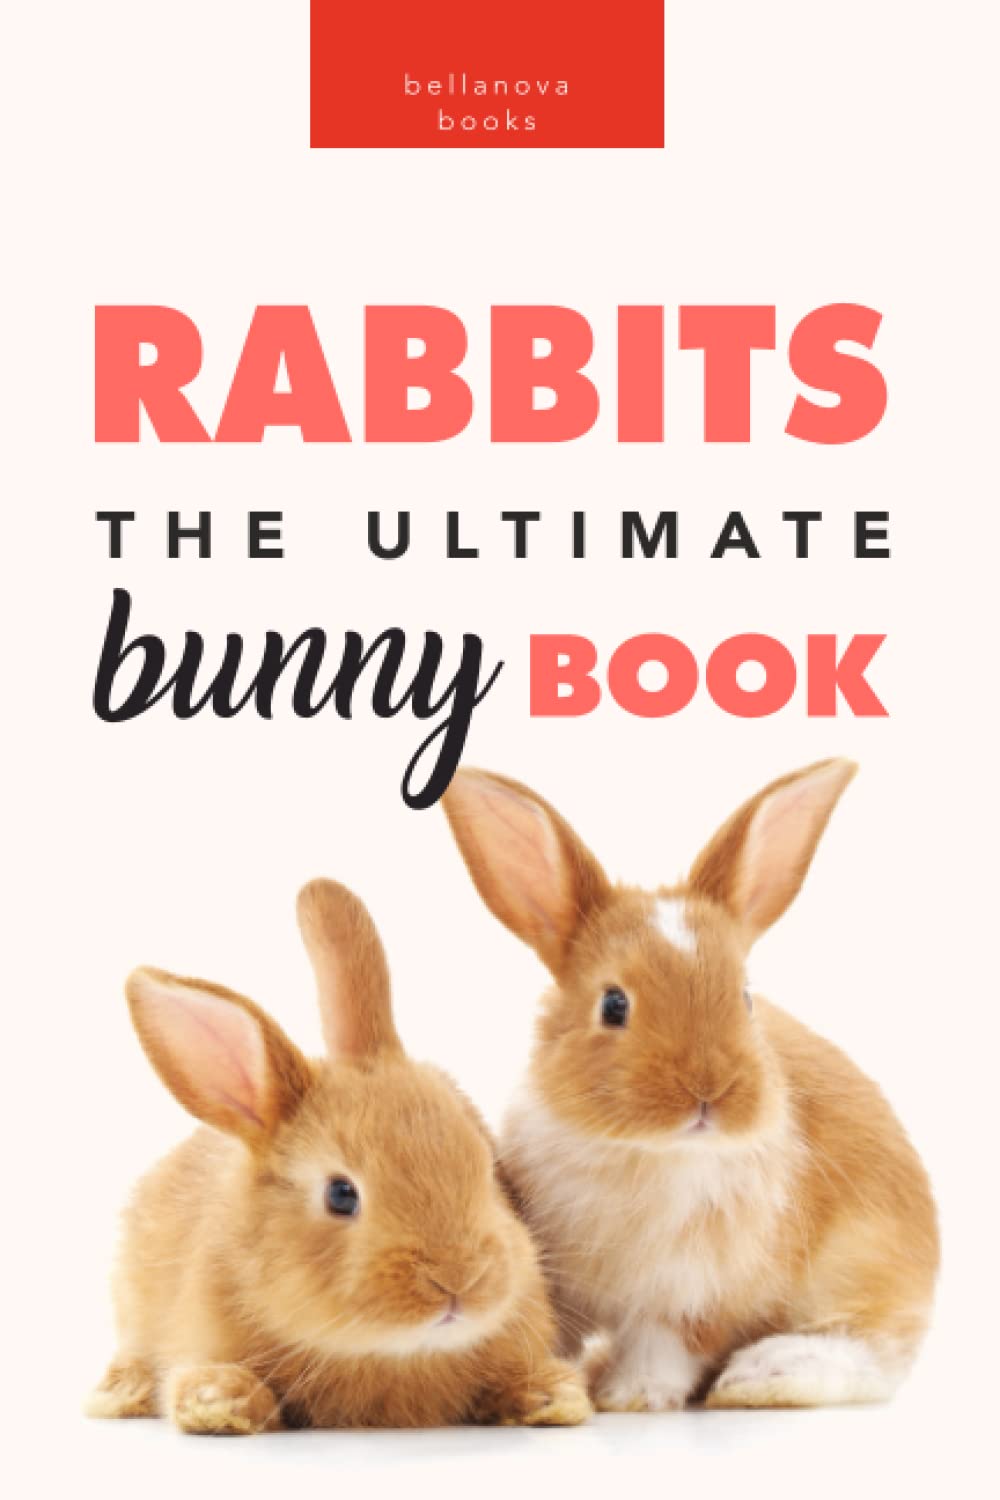 Rabbits-The-Ultimate-Bunny-Book-100-Amazing-Rabbit-Facts-Photos.jpg